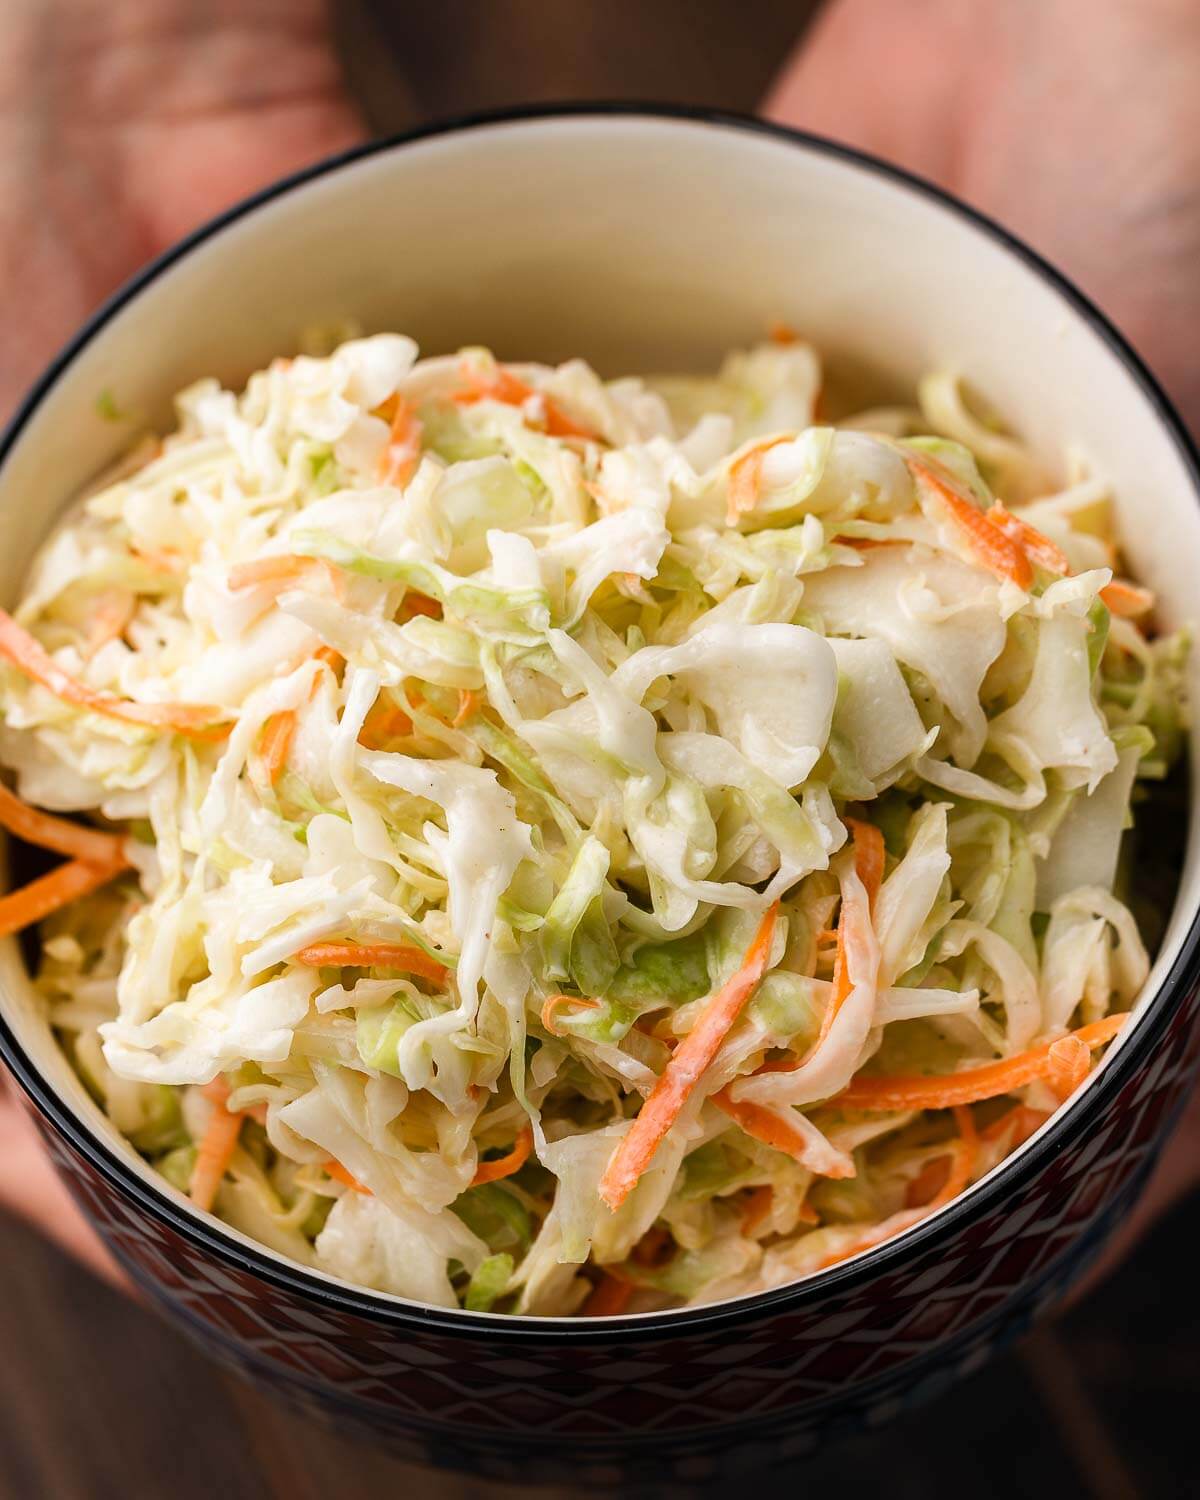 Hands holding small bowl of New York deli coleslaw.